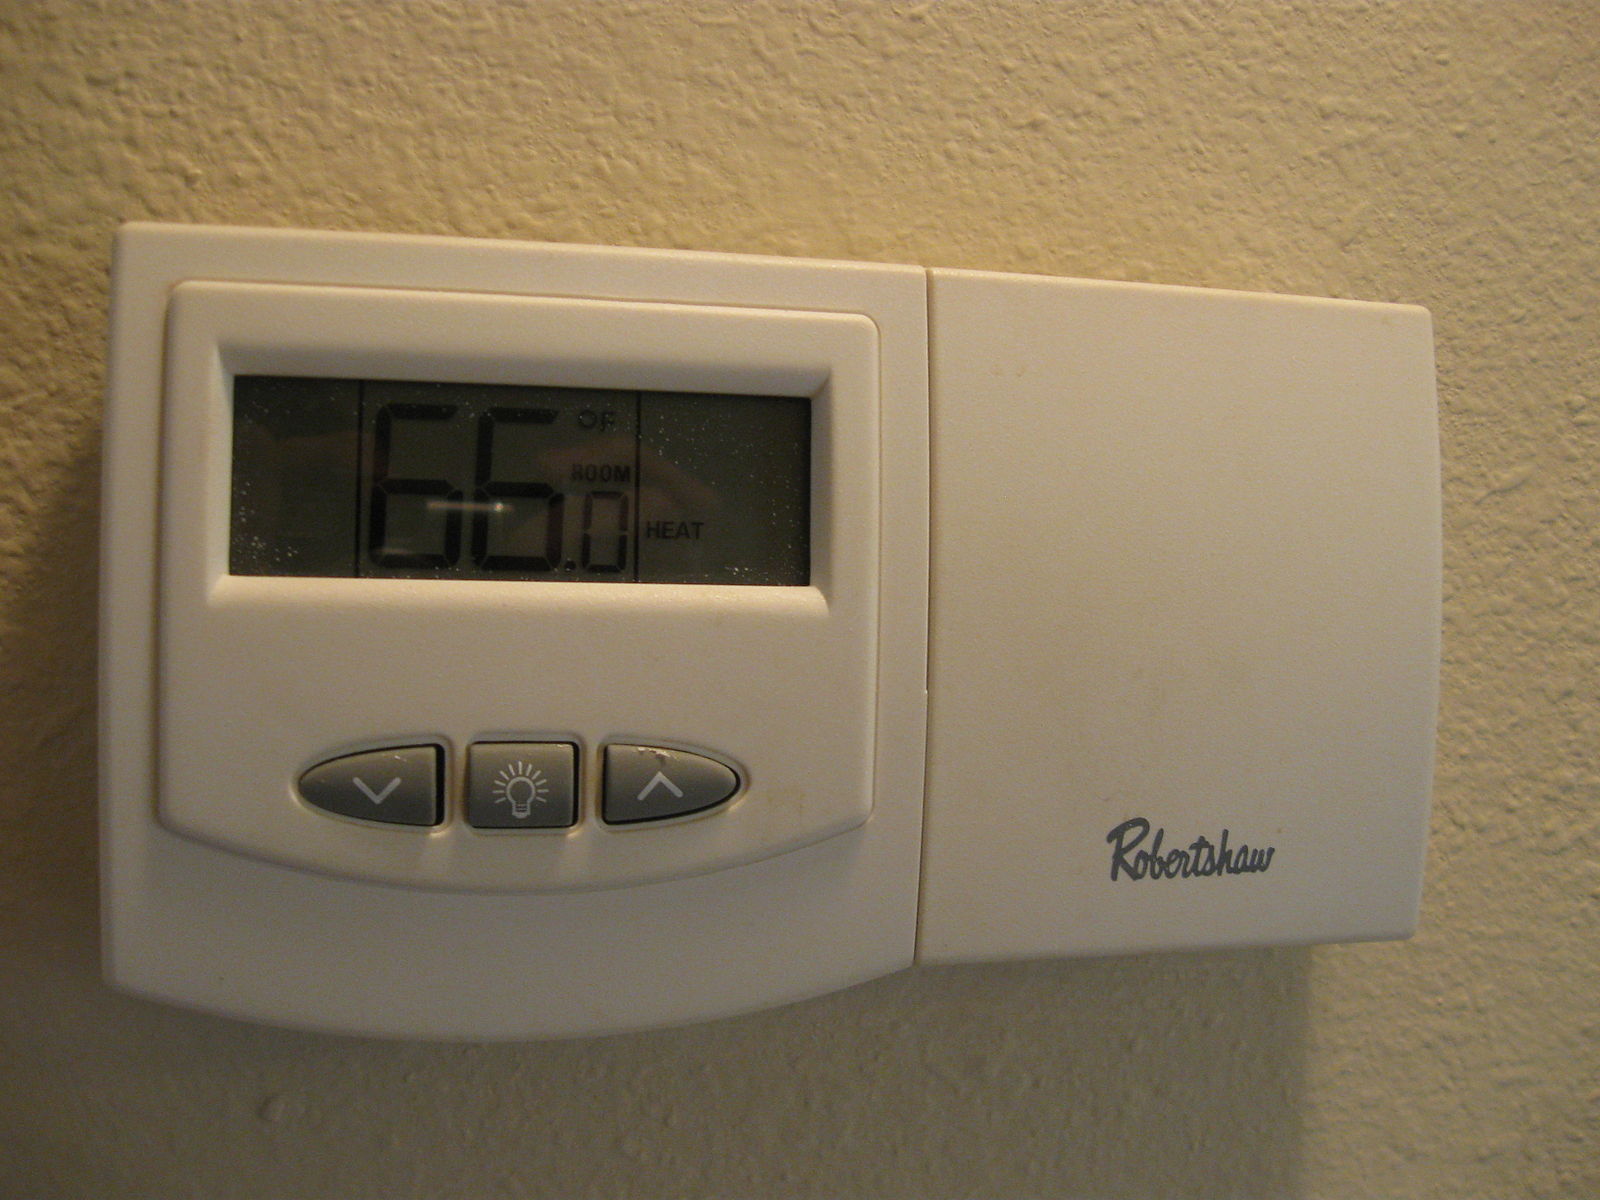 who replaces thermostats